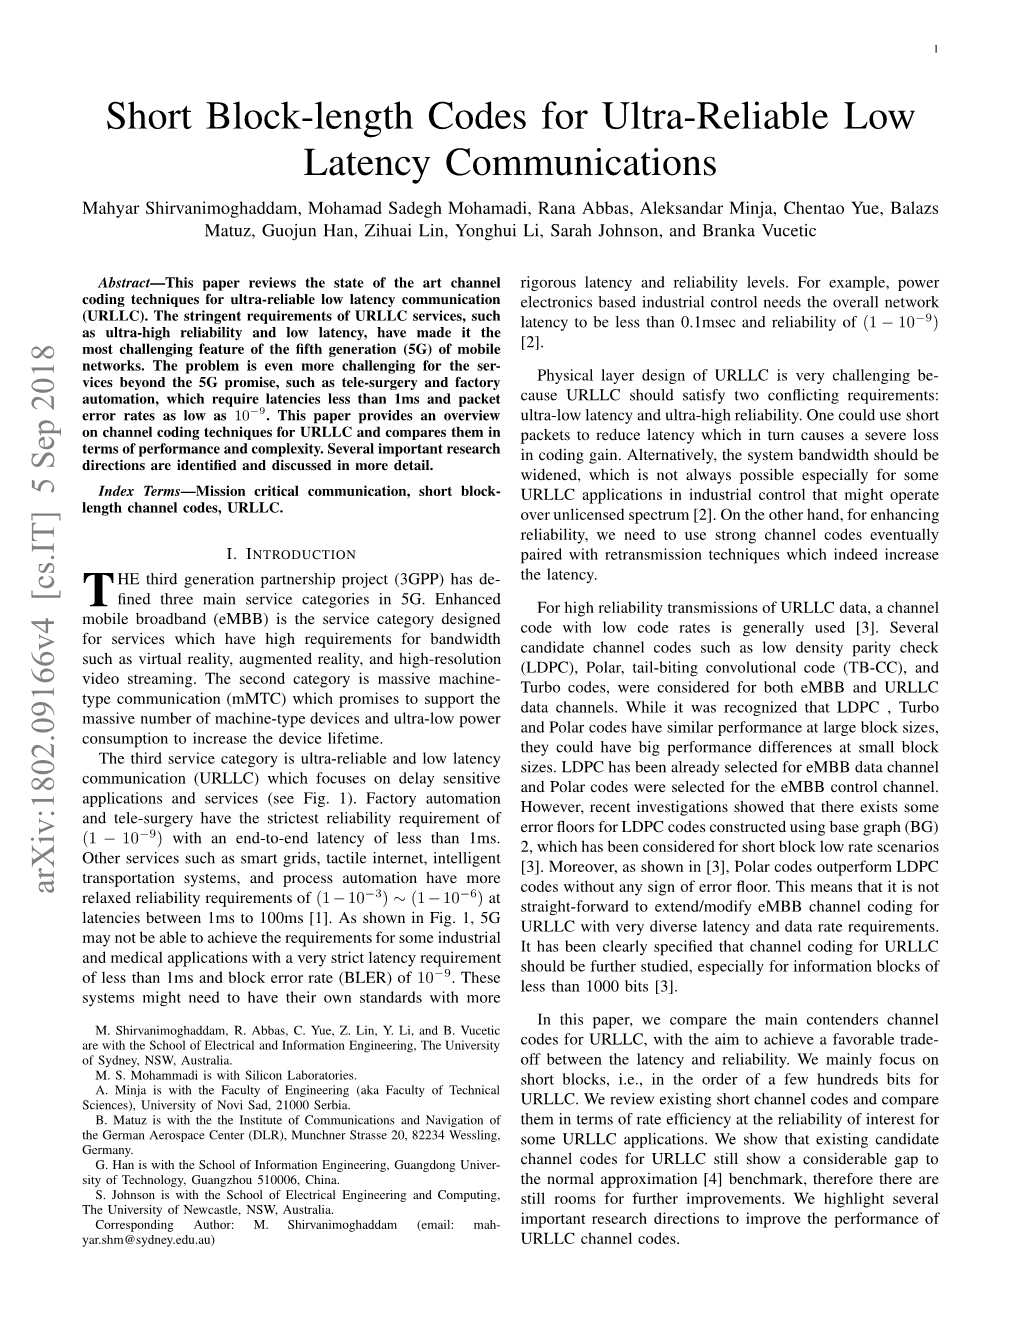 Short Block-Length Codes for Ultra-Reliable Low Latency Communications